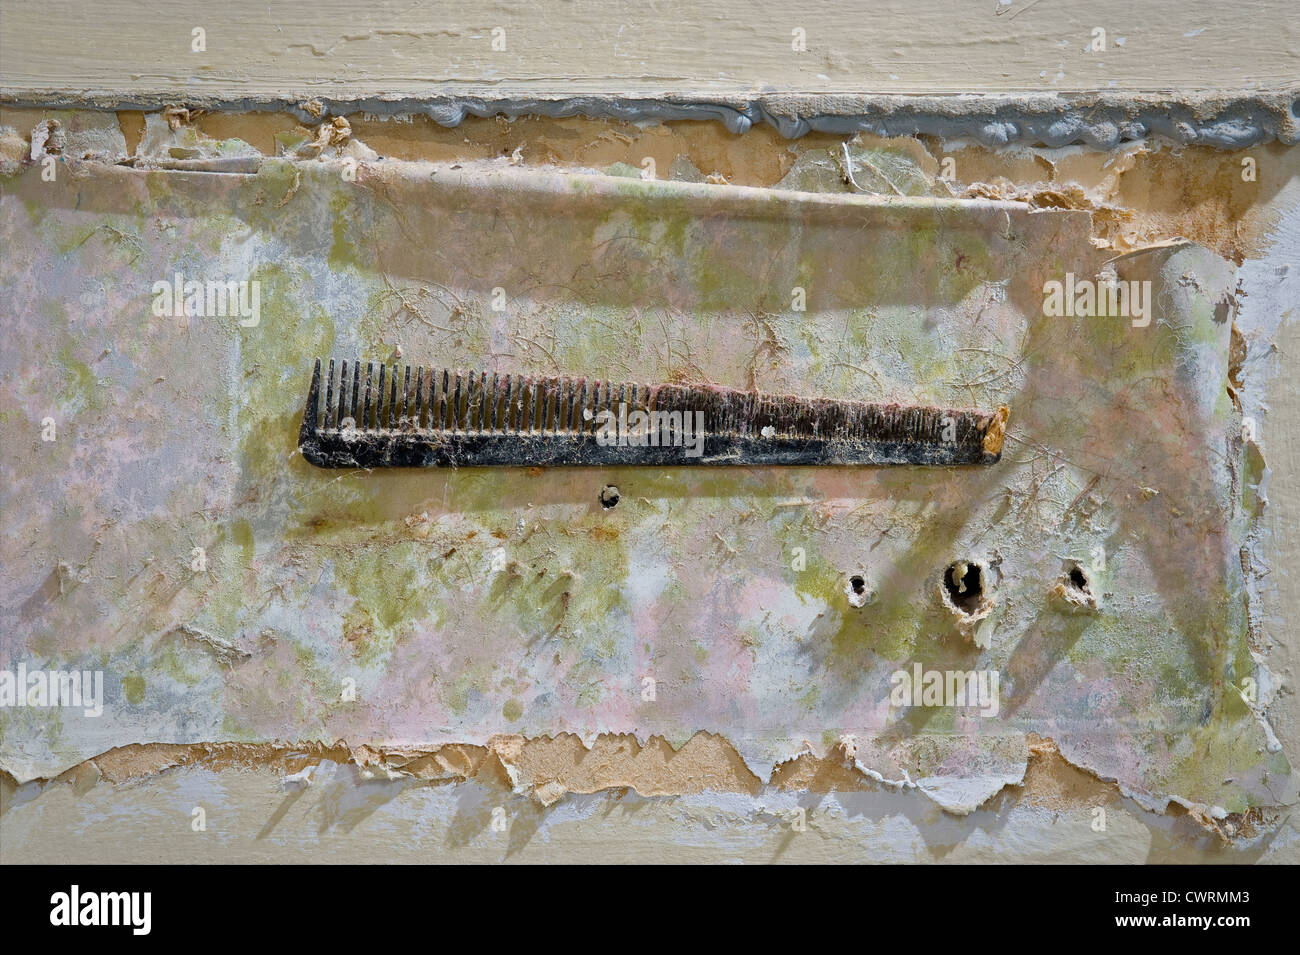 Old Dirty Comb Stuck To Wall With Peeling Wallpaper & Paint Stock Photo